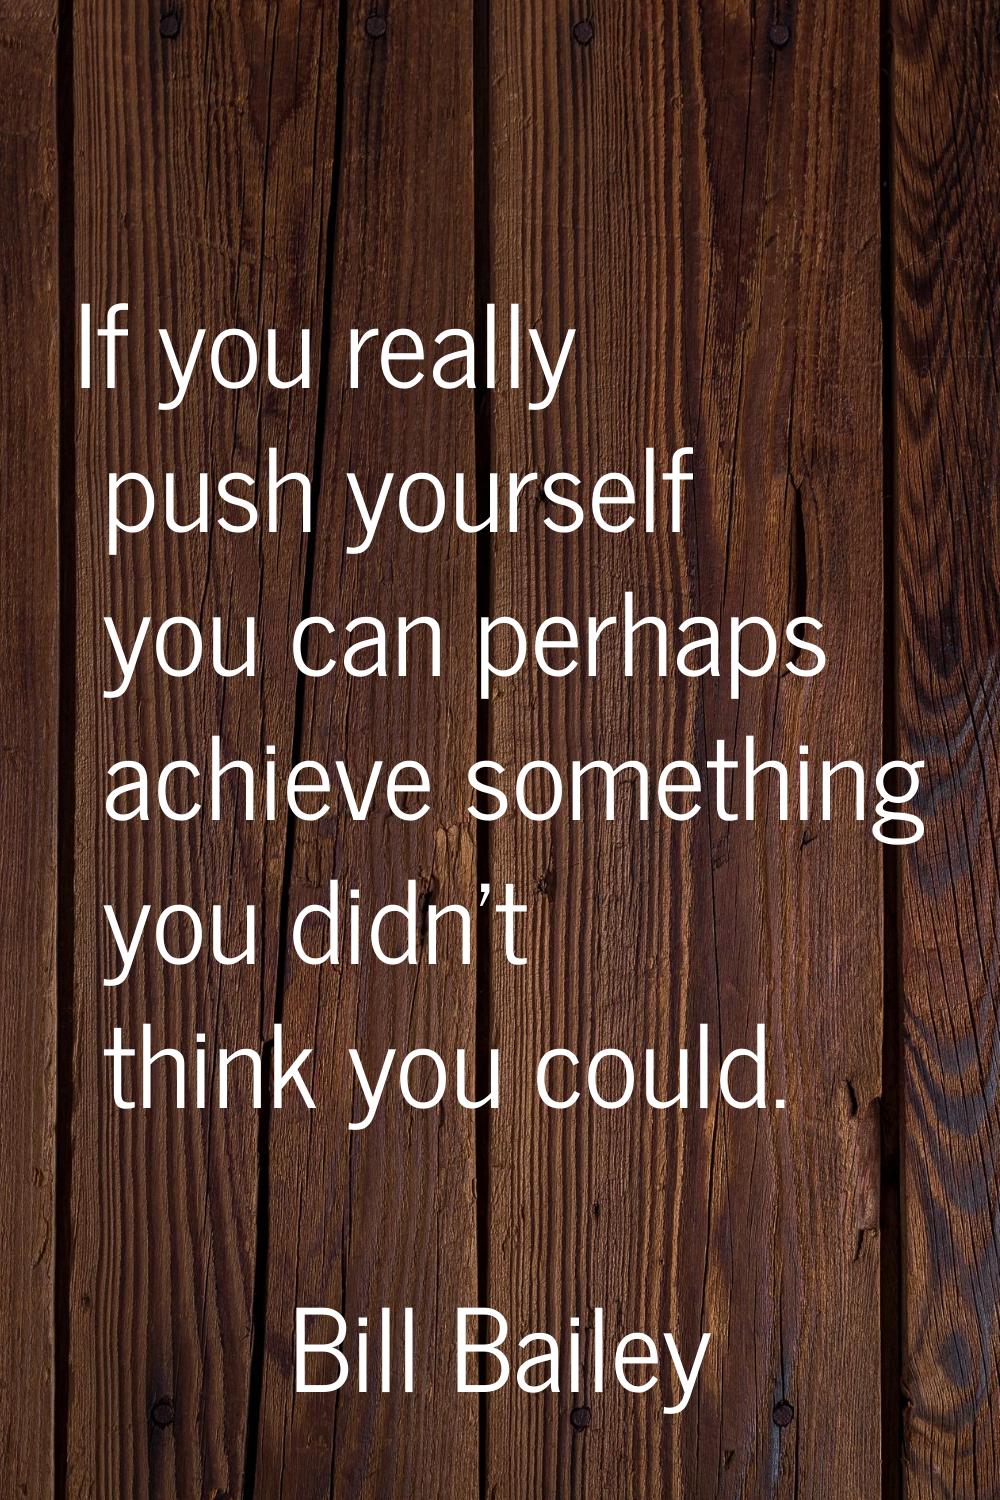 If you really push yourself you can perhaps achieve something you didn't think you could.